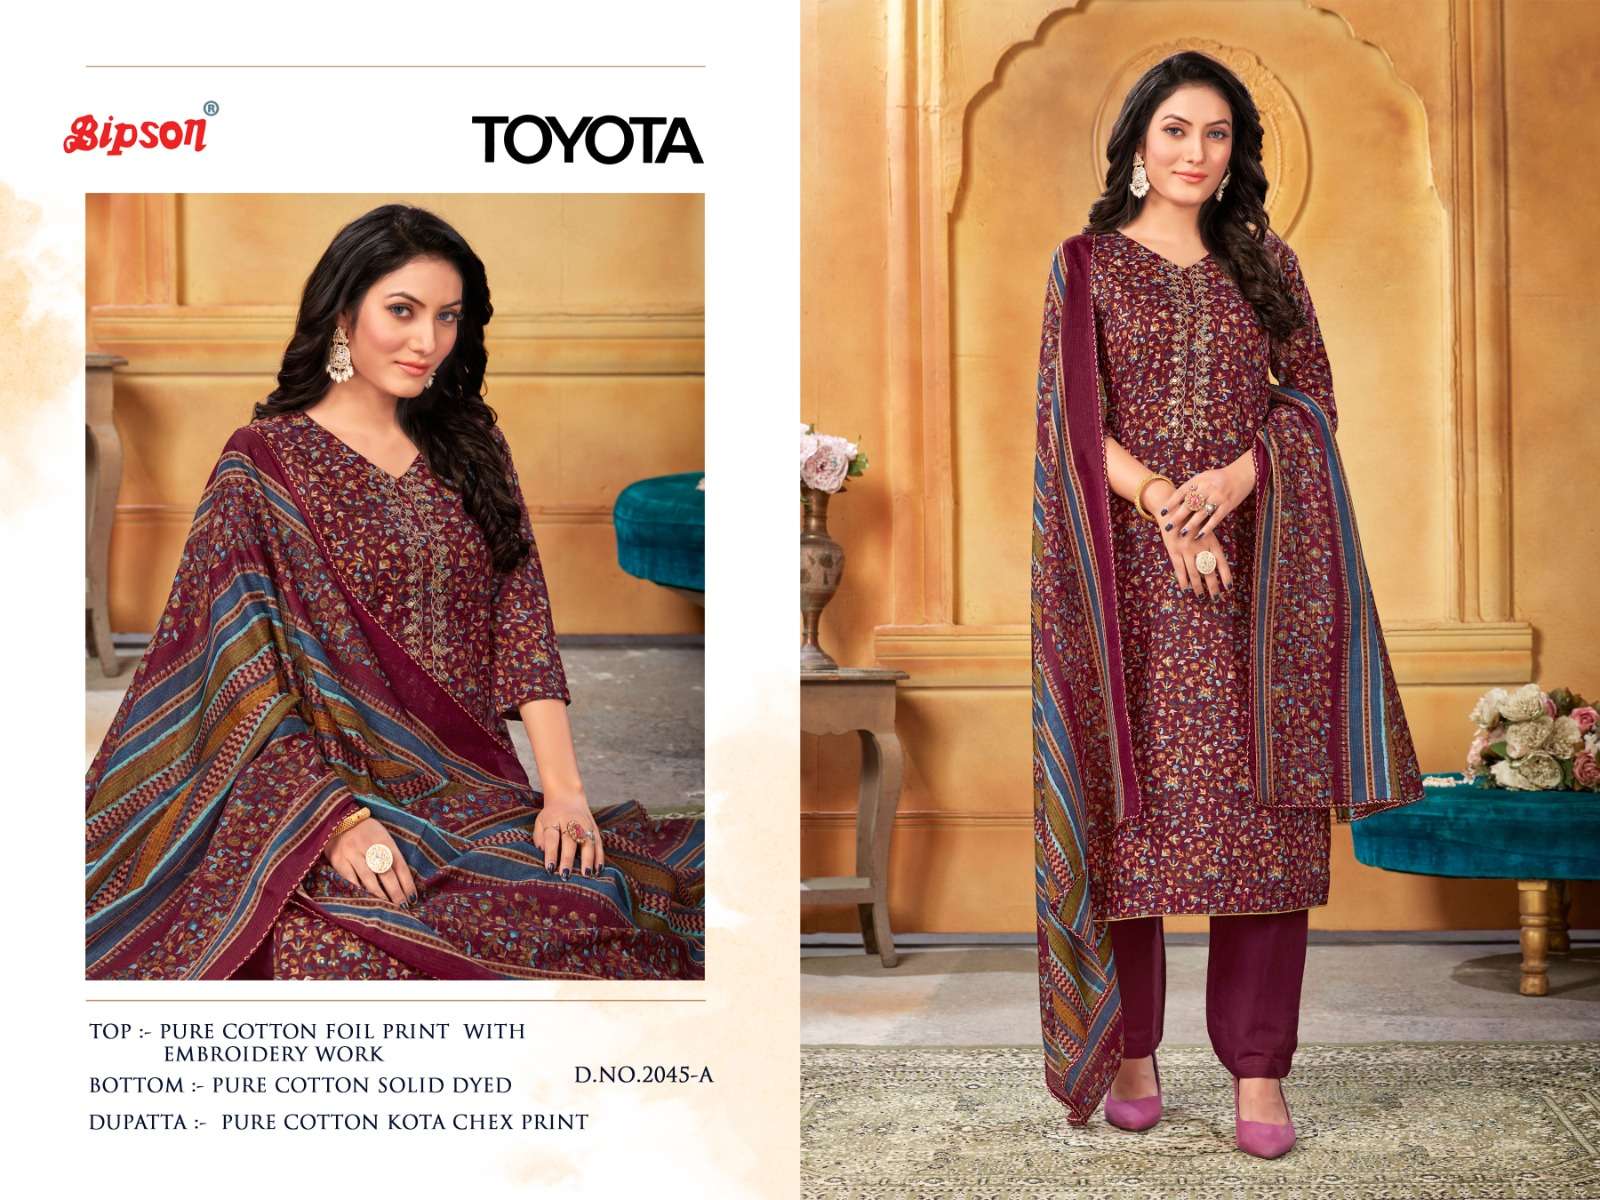 BIPSON TOYOTA 2045 DESIGNER COTTON FOIL PRINT EMBROIDERY WORK STYLISH PRINTED LOW RANGE SUITS WHOLESALE 